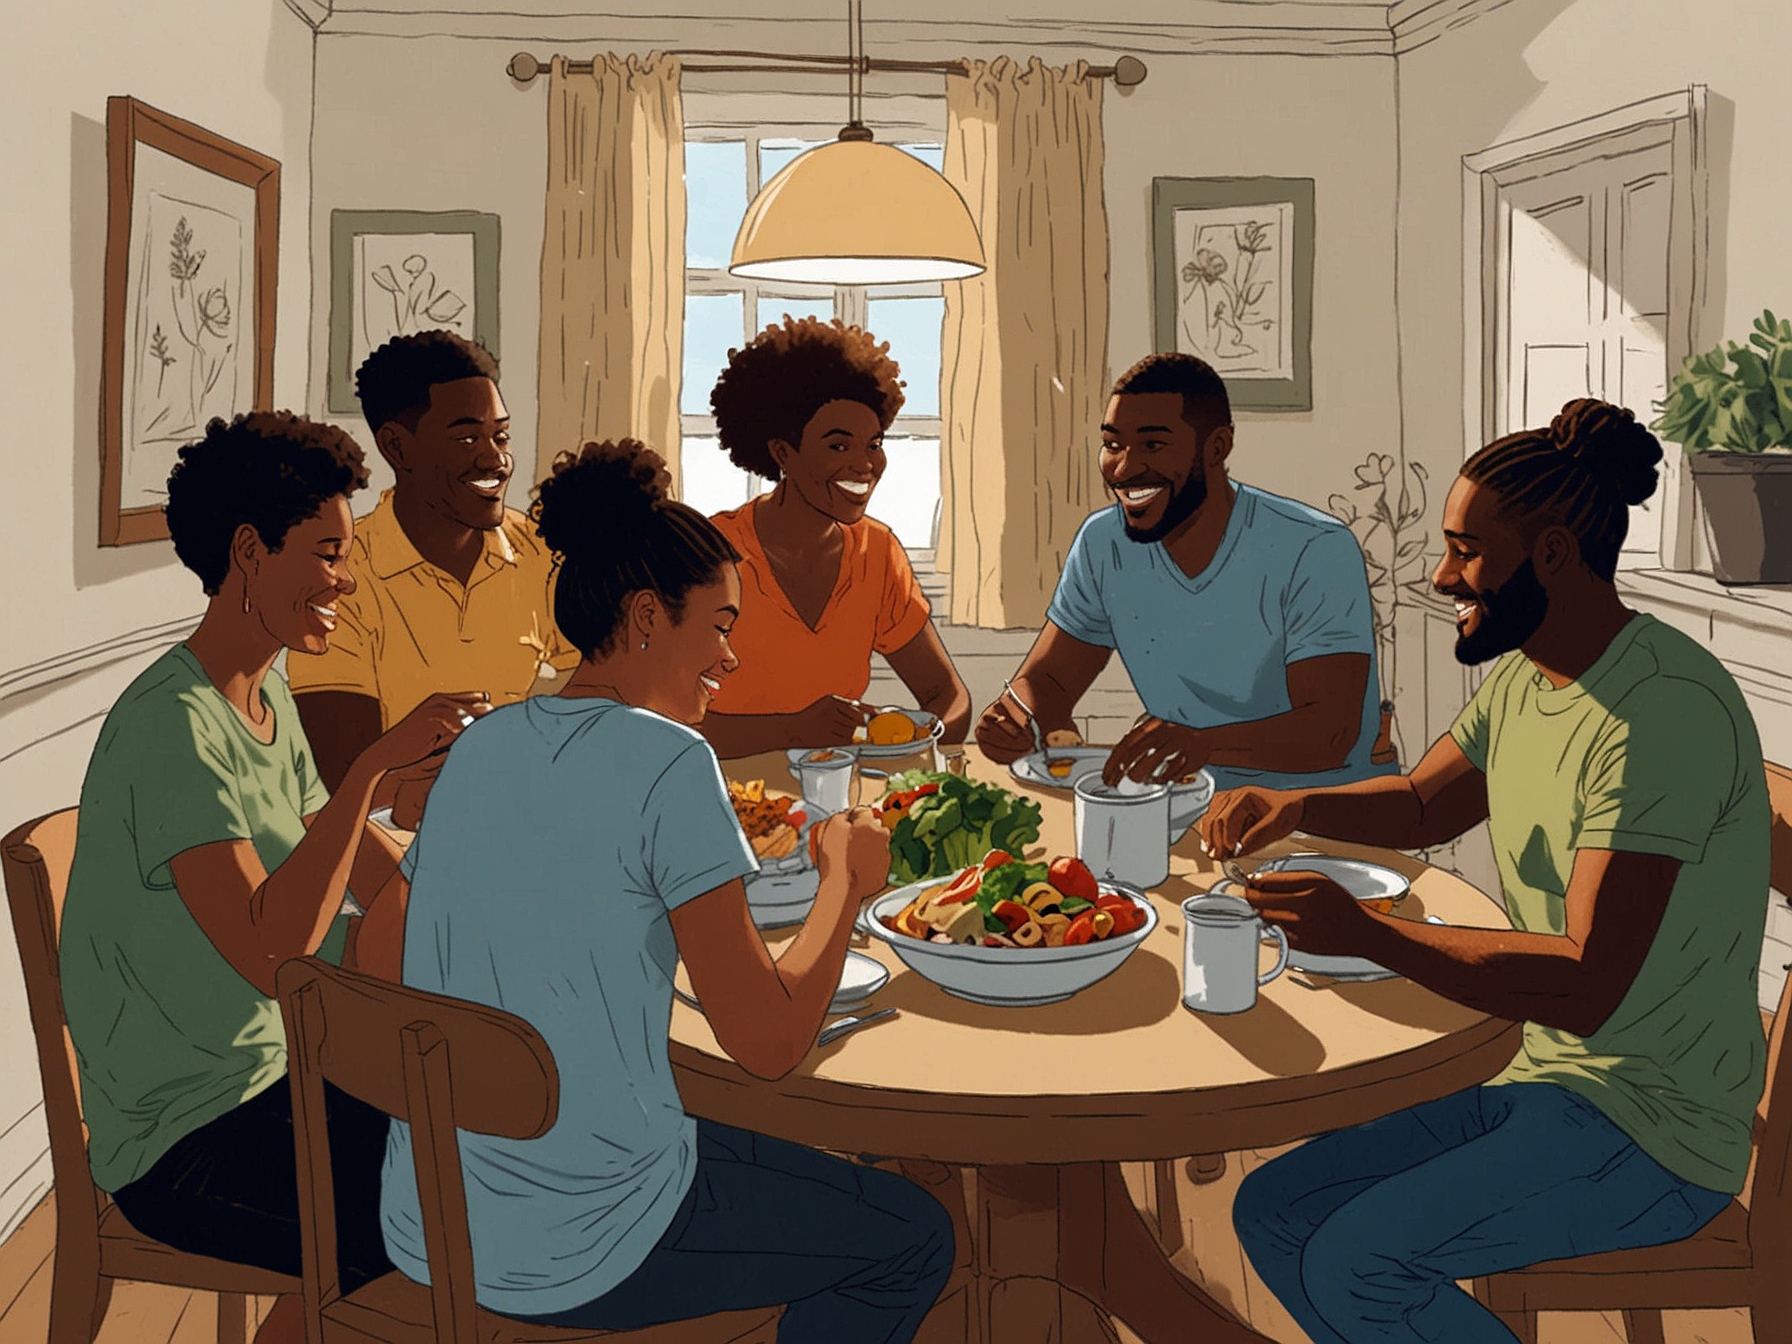 A diverse group of friends and family members gathered around a table, sharing a healthy meal. The image illustrates the significance of strong social connections and a nutritious diet for mental wellness.